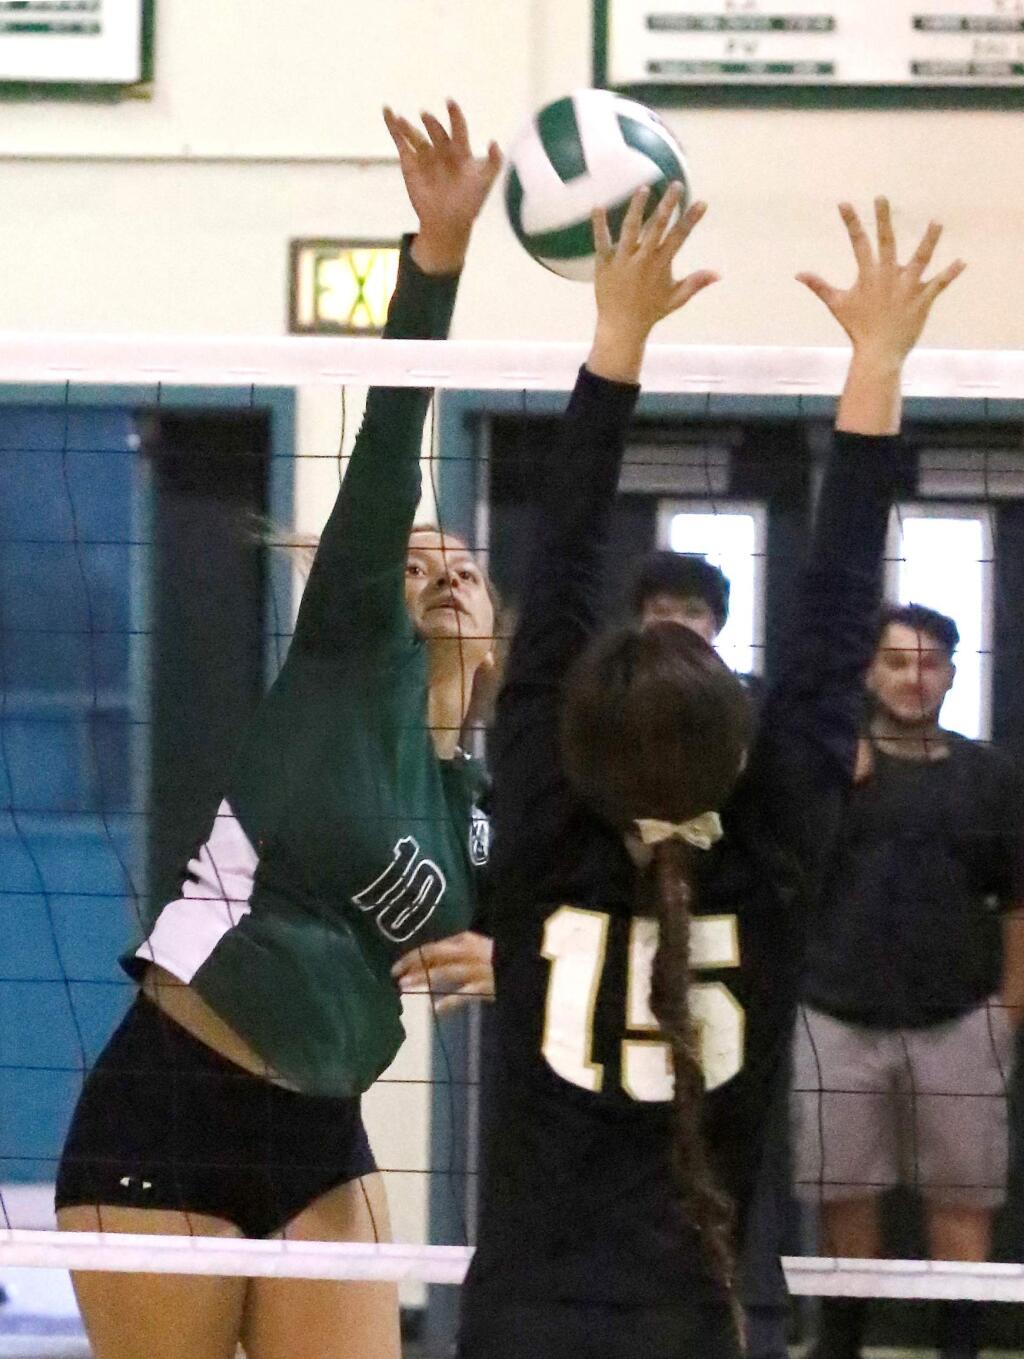 Senior Gianna Bruton keeps making plays at the net the lead the Sonoma Valley Dragons to a winning season in the VVAL. She is one of three seniors on the team - including Angelina Carabini and Alondra Martinez - who are giving it all for the school team this year. (BIll Hoban/Special to the Index-Tribune)